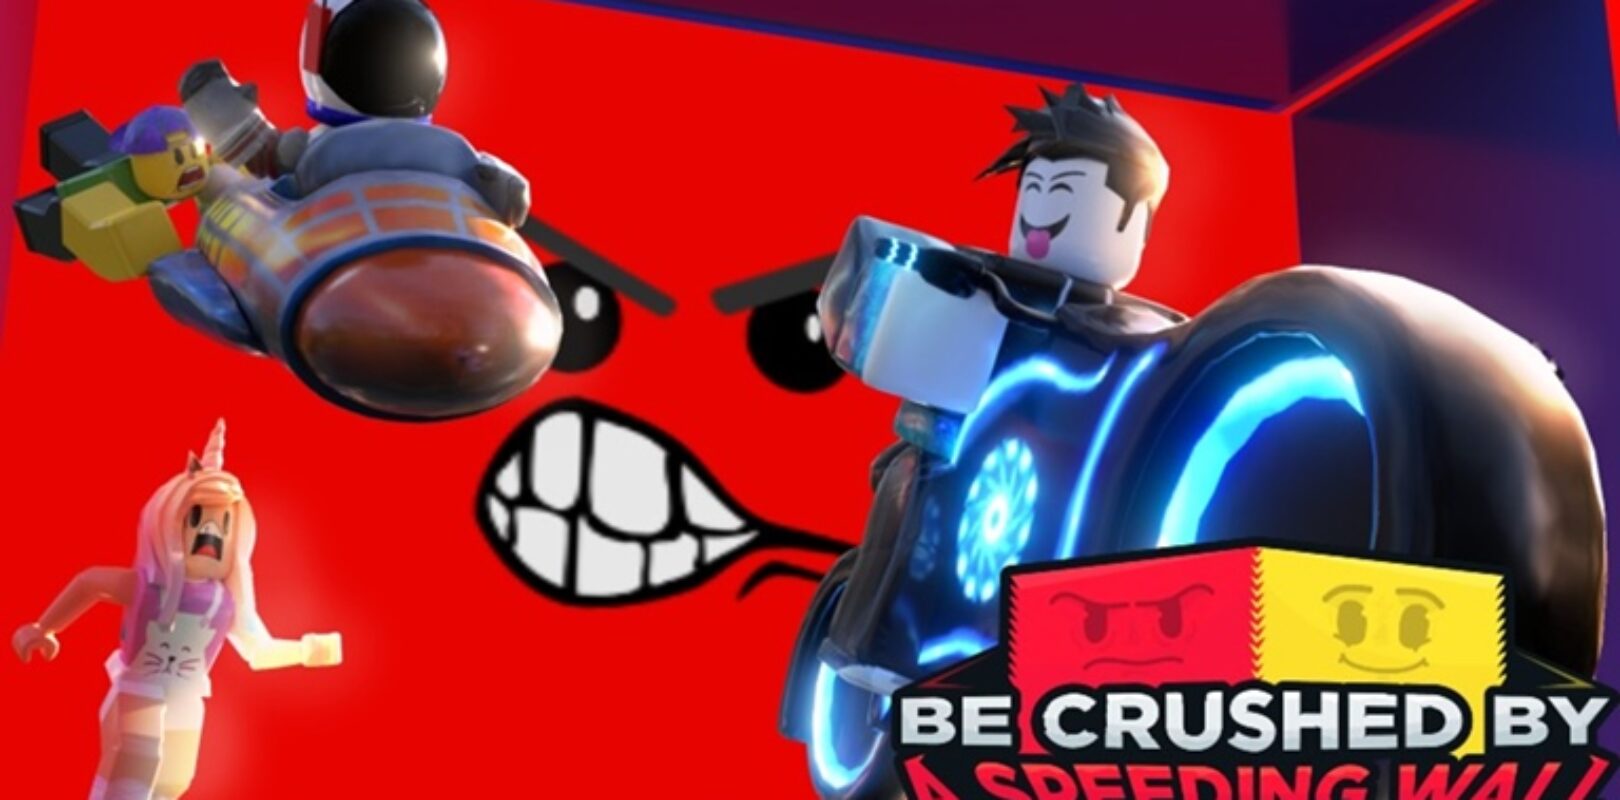 Be Crushed By A Speeding Wall Codes July 2021 Pivotal Gamers - be crushed by a speeding wall roblox secret code